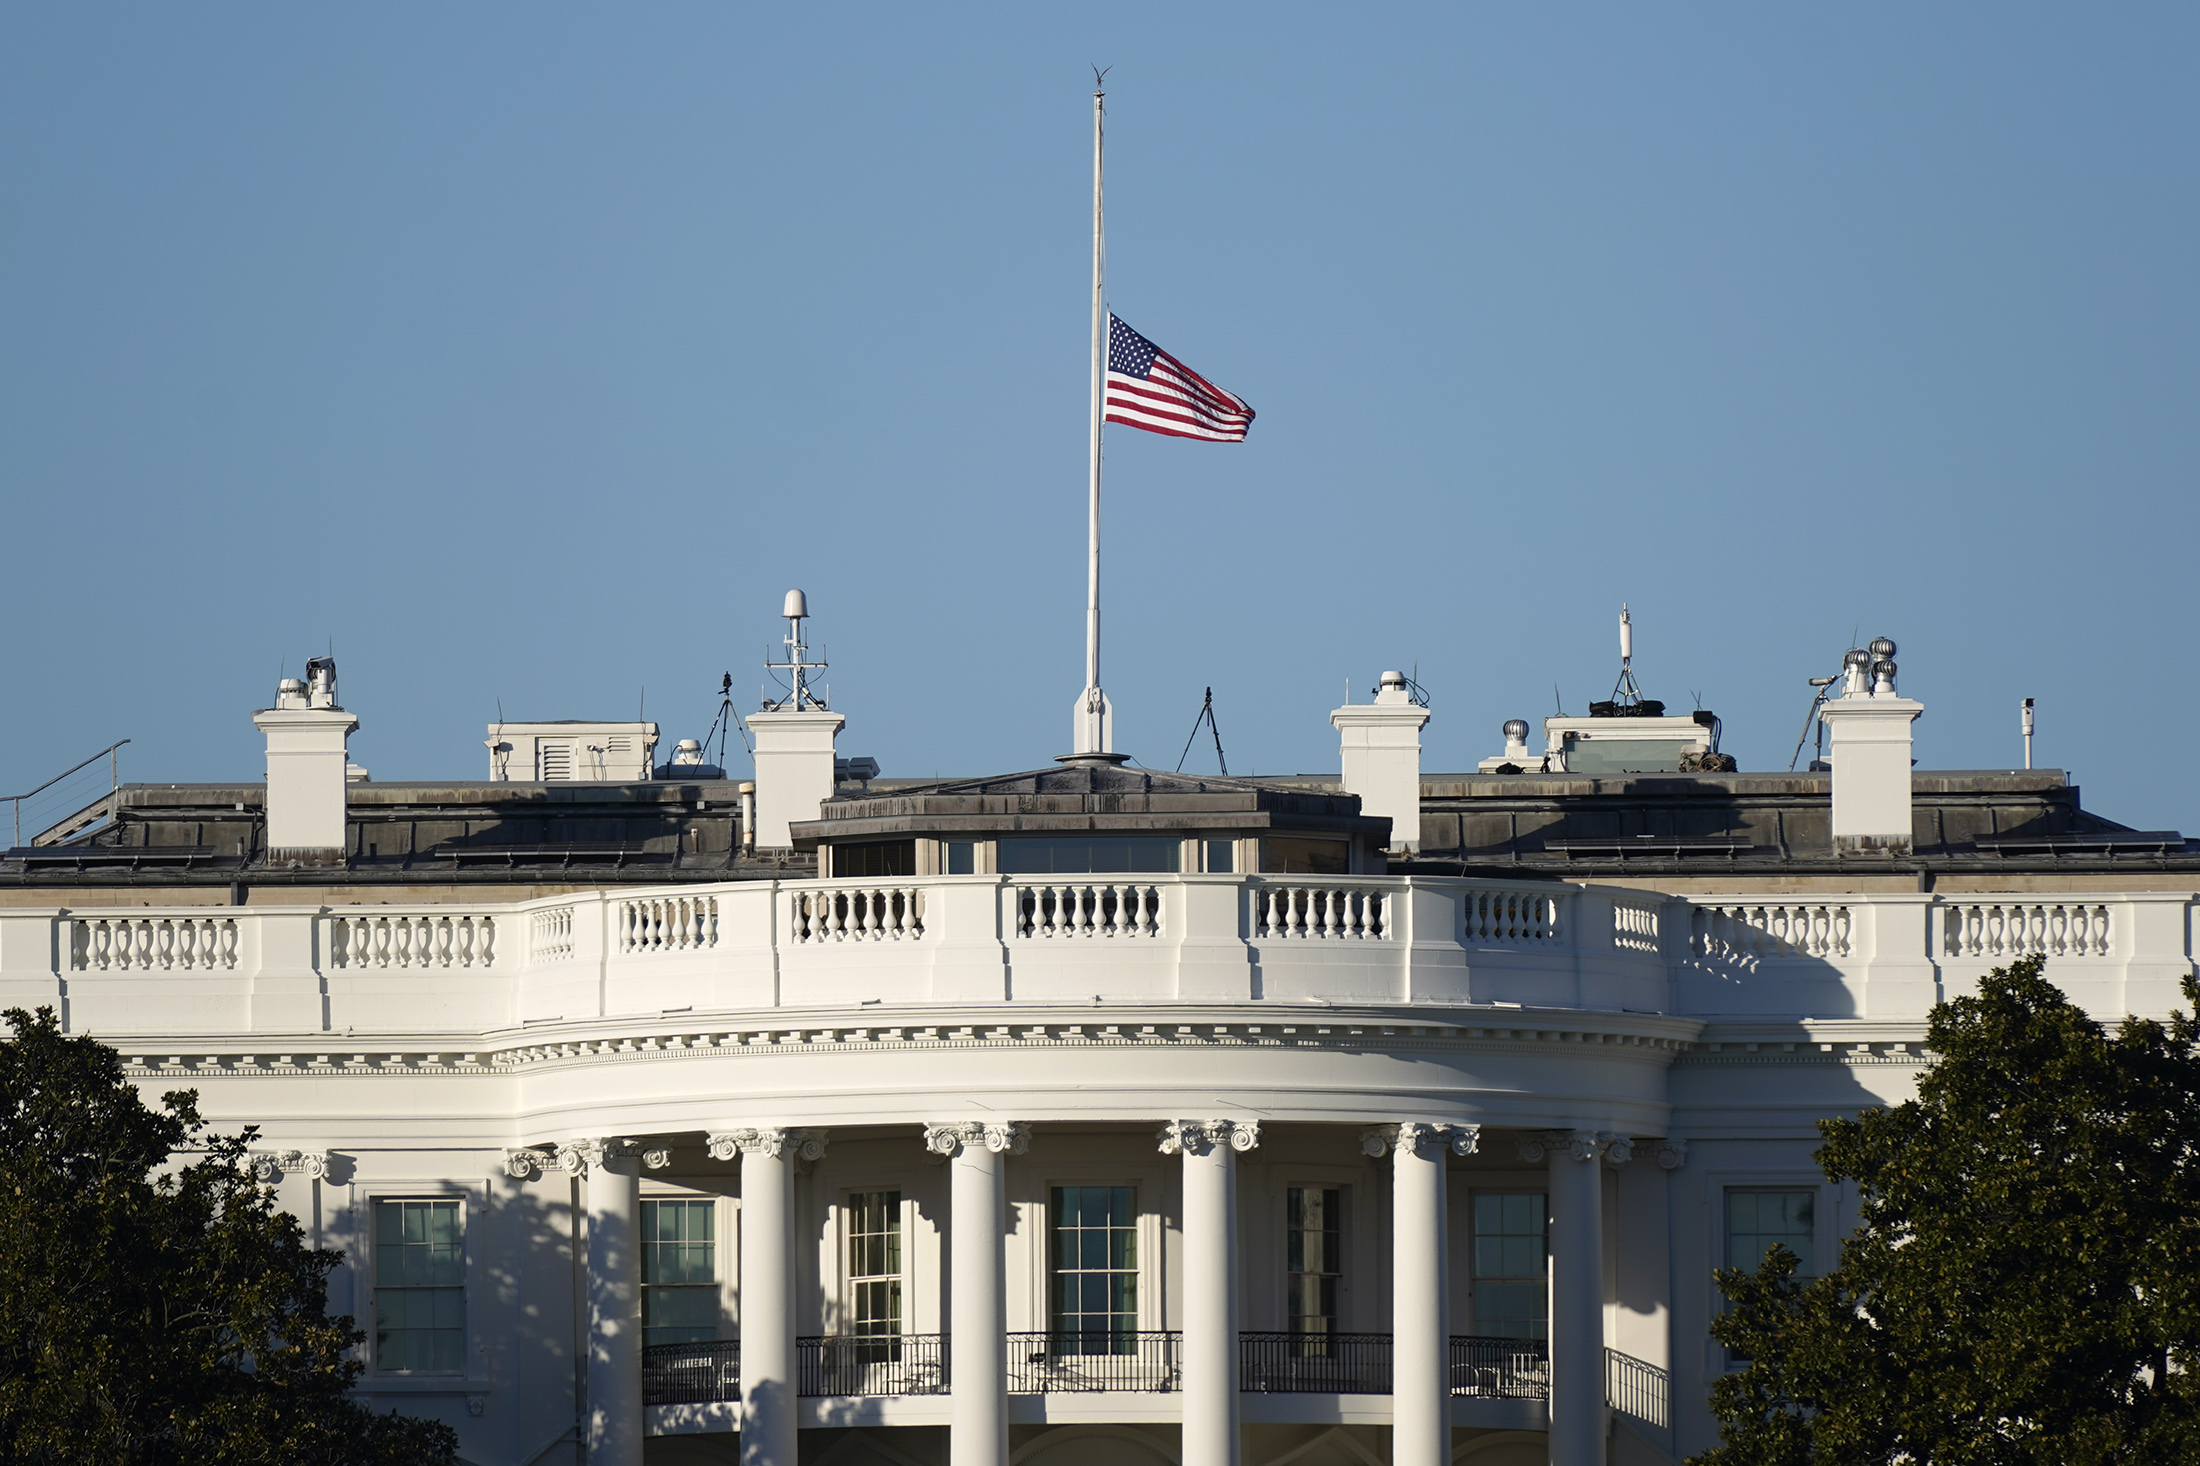 An American flag flies at half-staff above the White House in Washington, D.C. on Jan. 10.